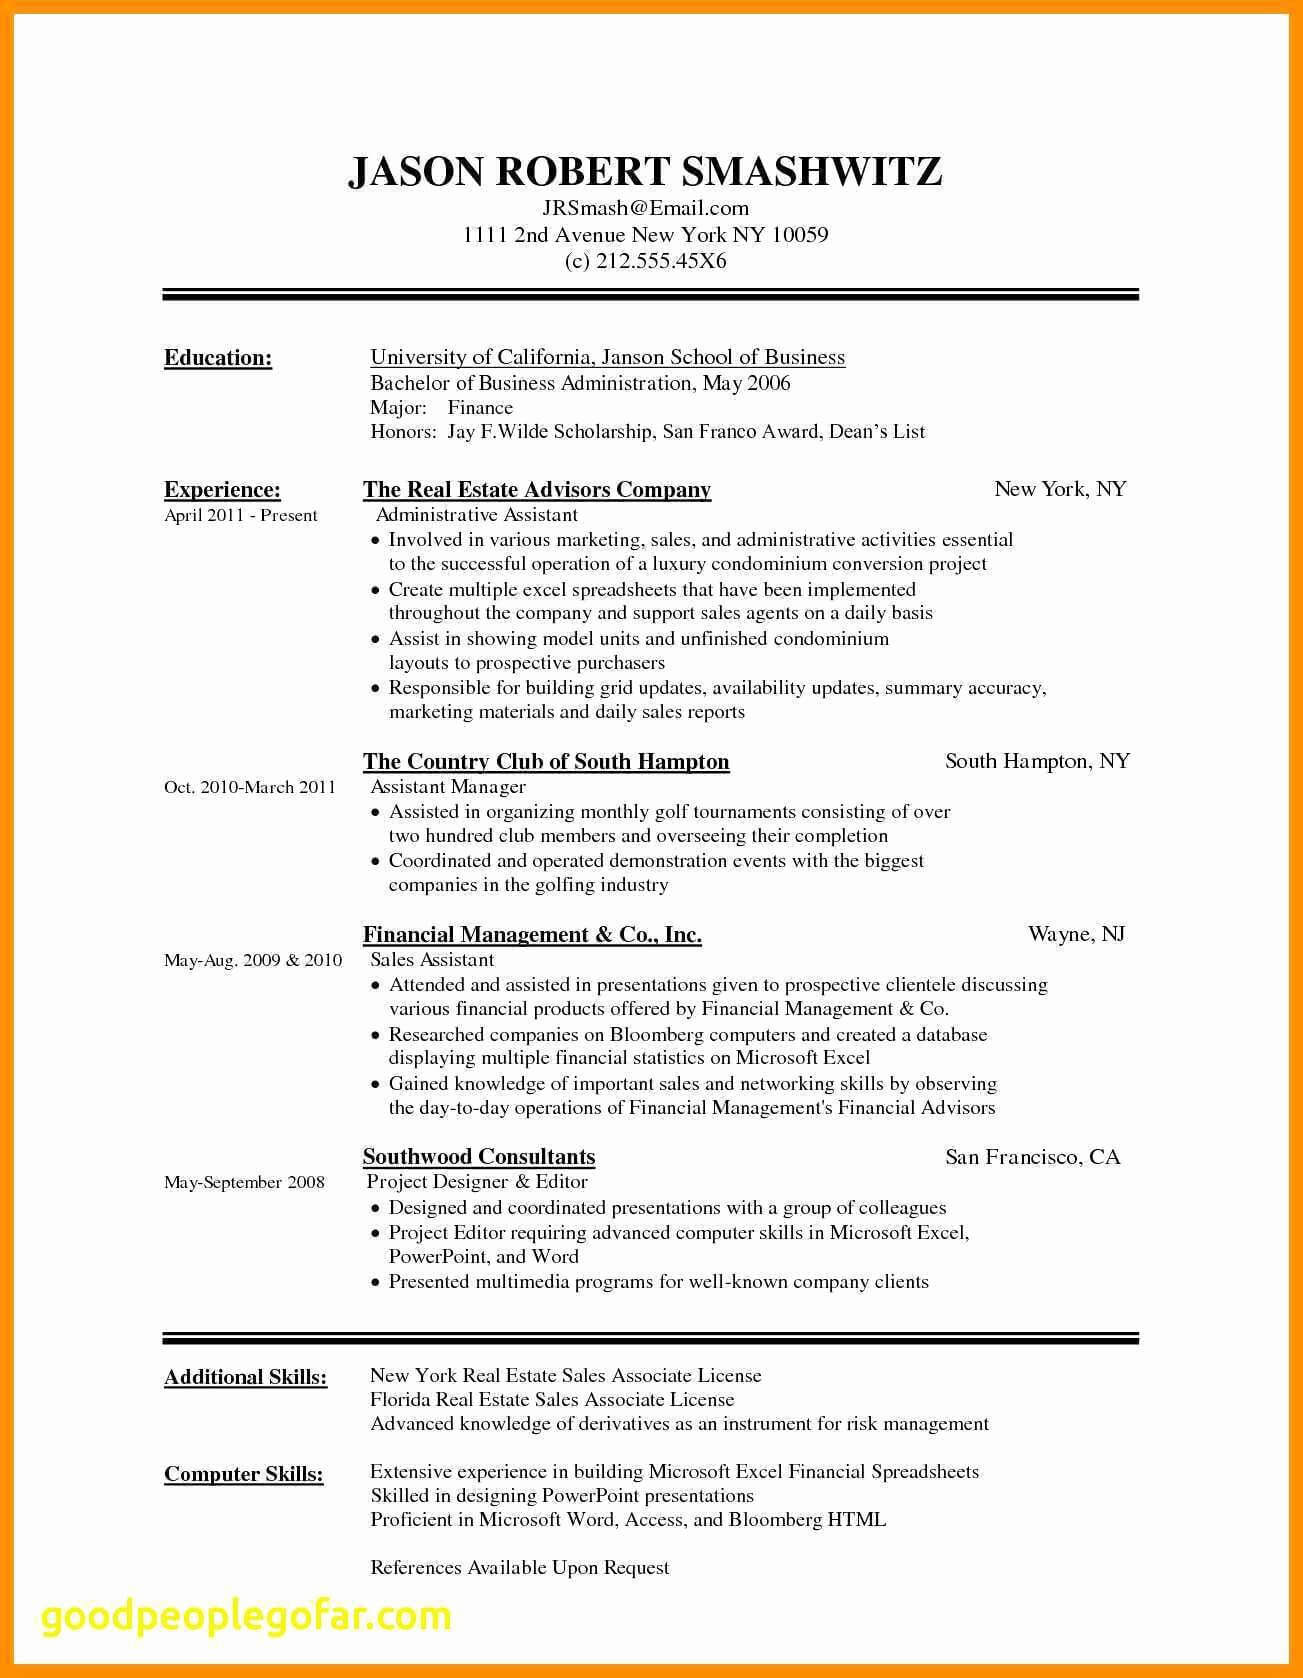 Resume Templates Word 2010 Download Fresh Free How To Use Pertaining To How To Use Templates In Word 2010